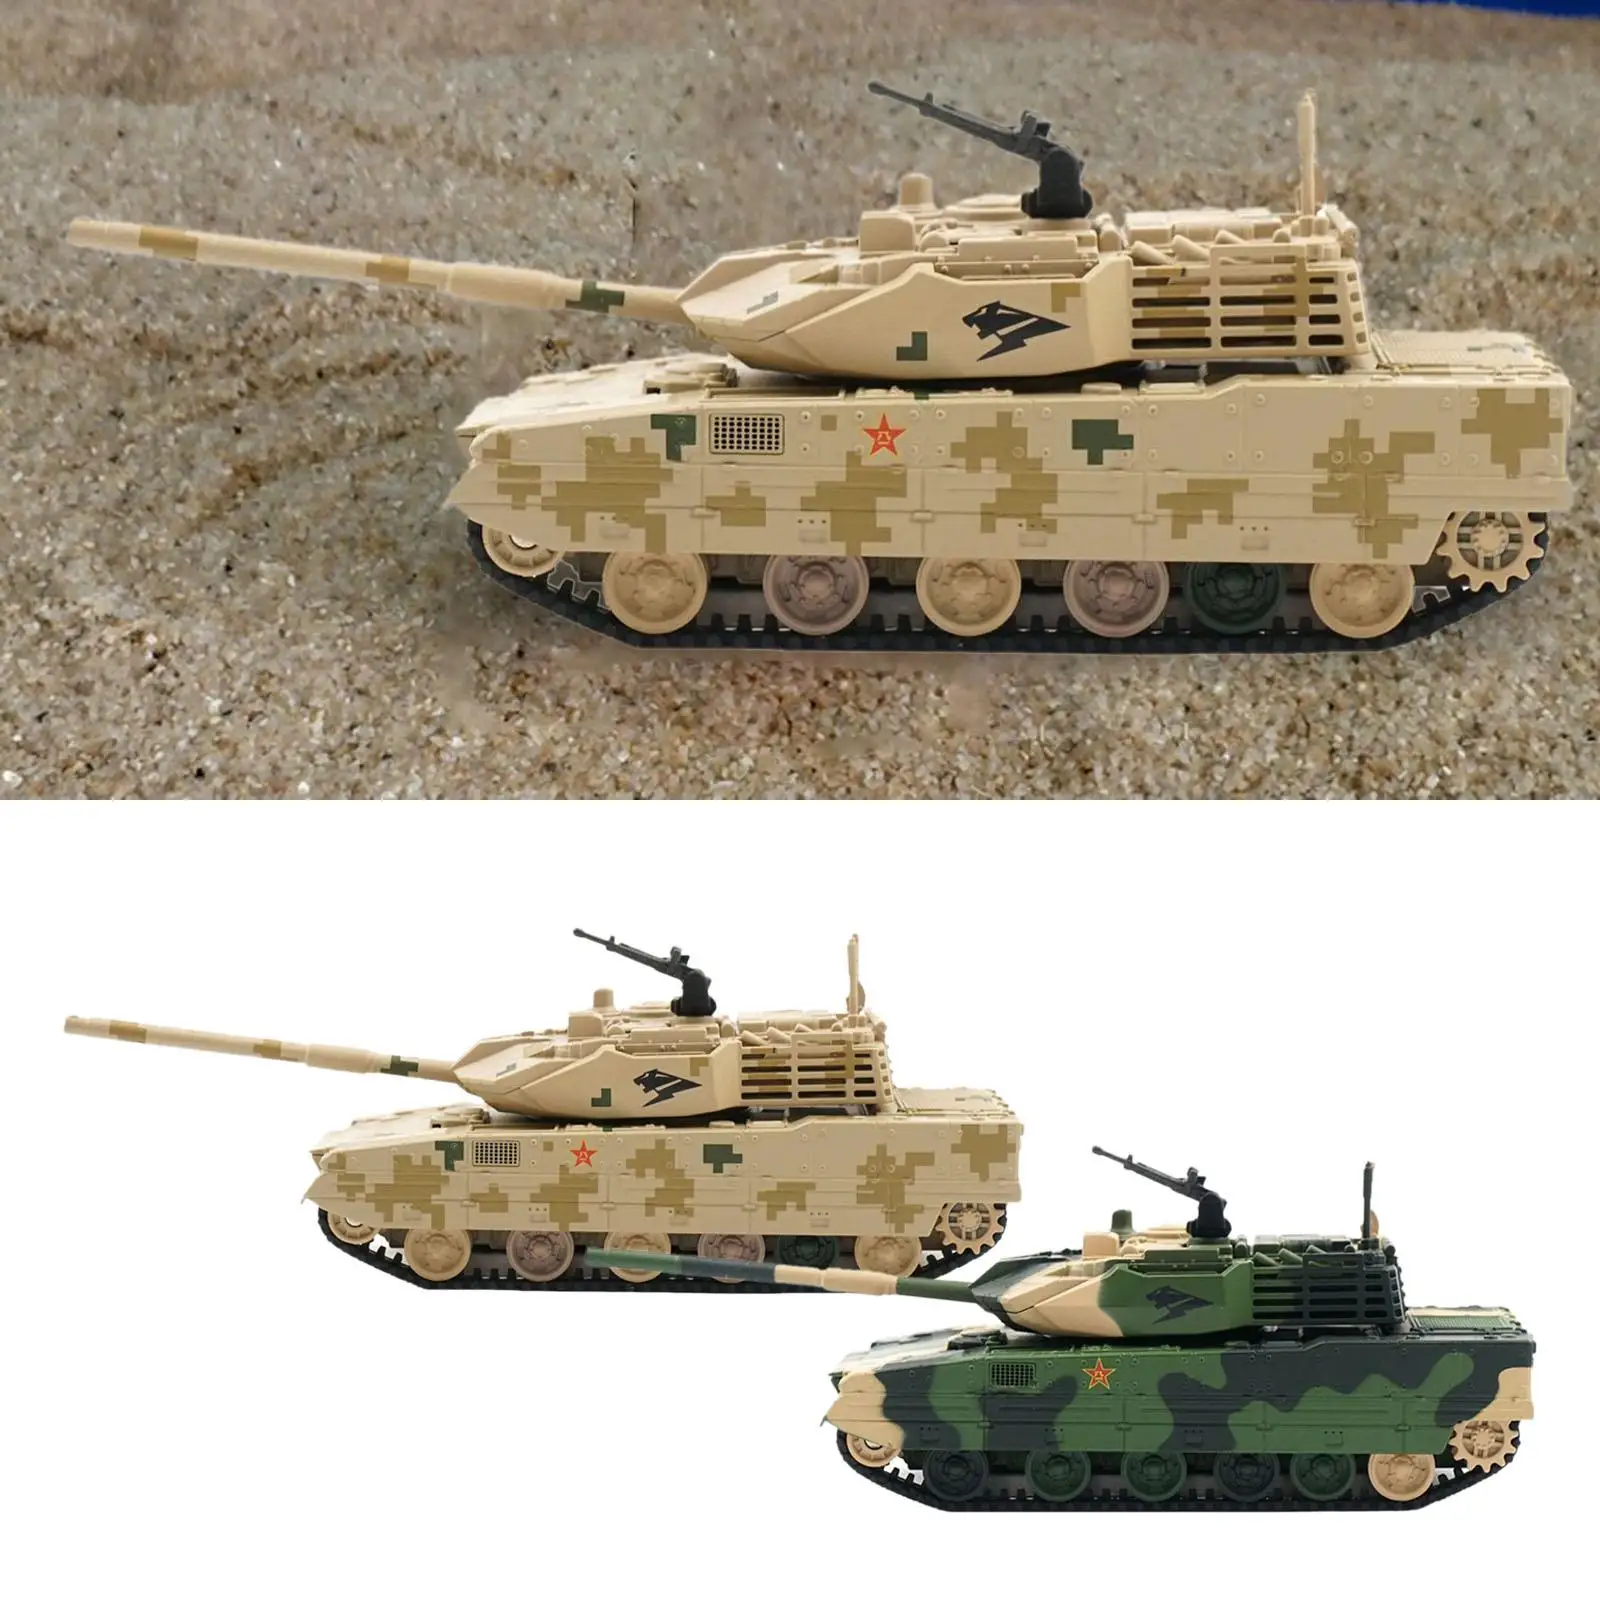 1/64 Scale Light Tank Model Collections Finished for Kids Gift Collectibles